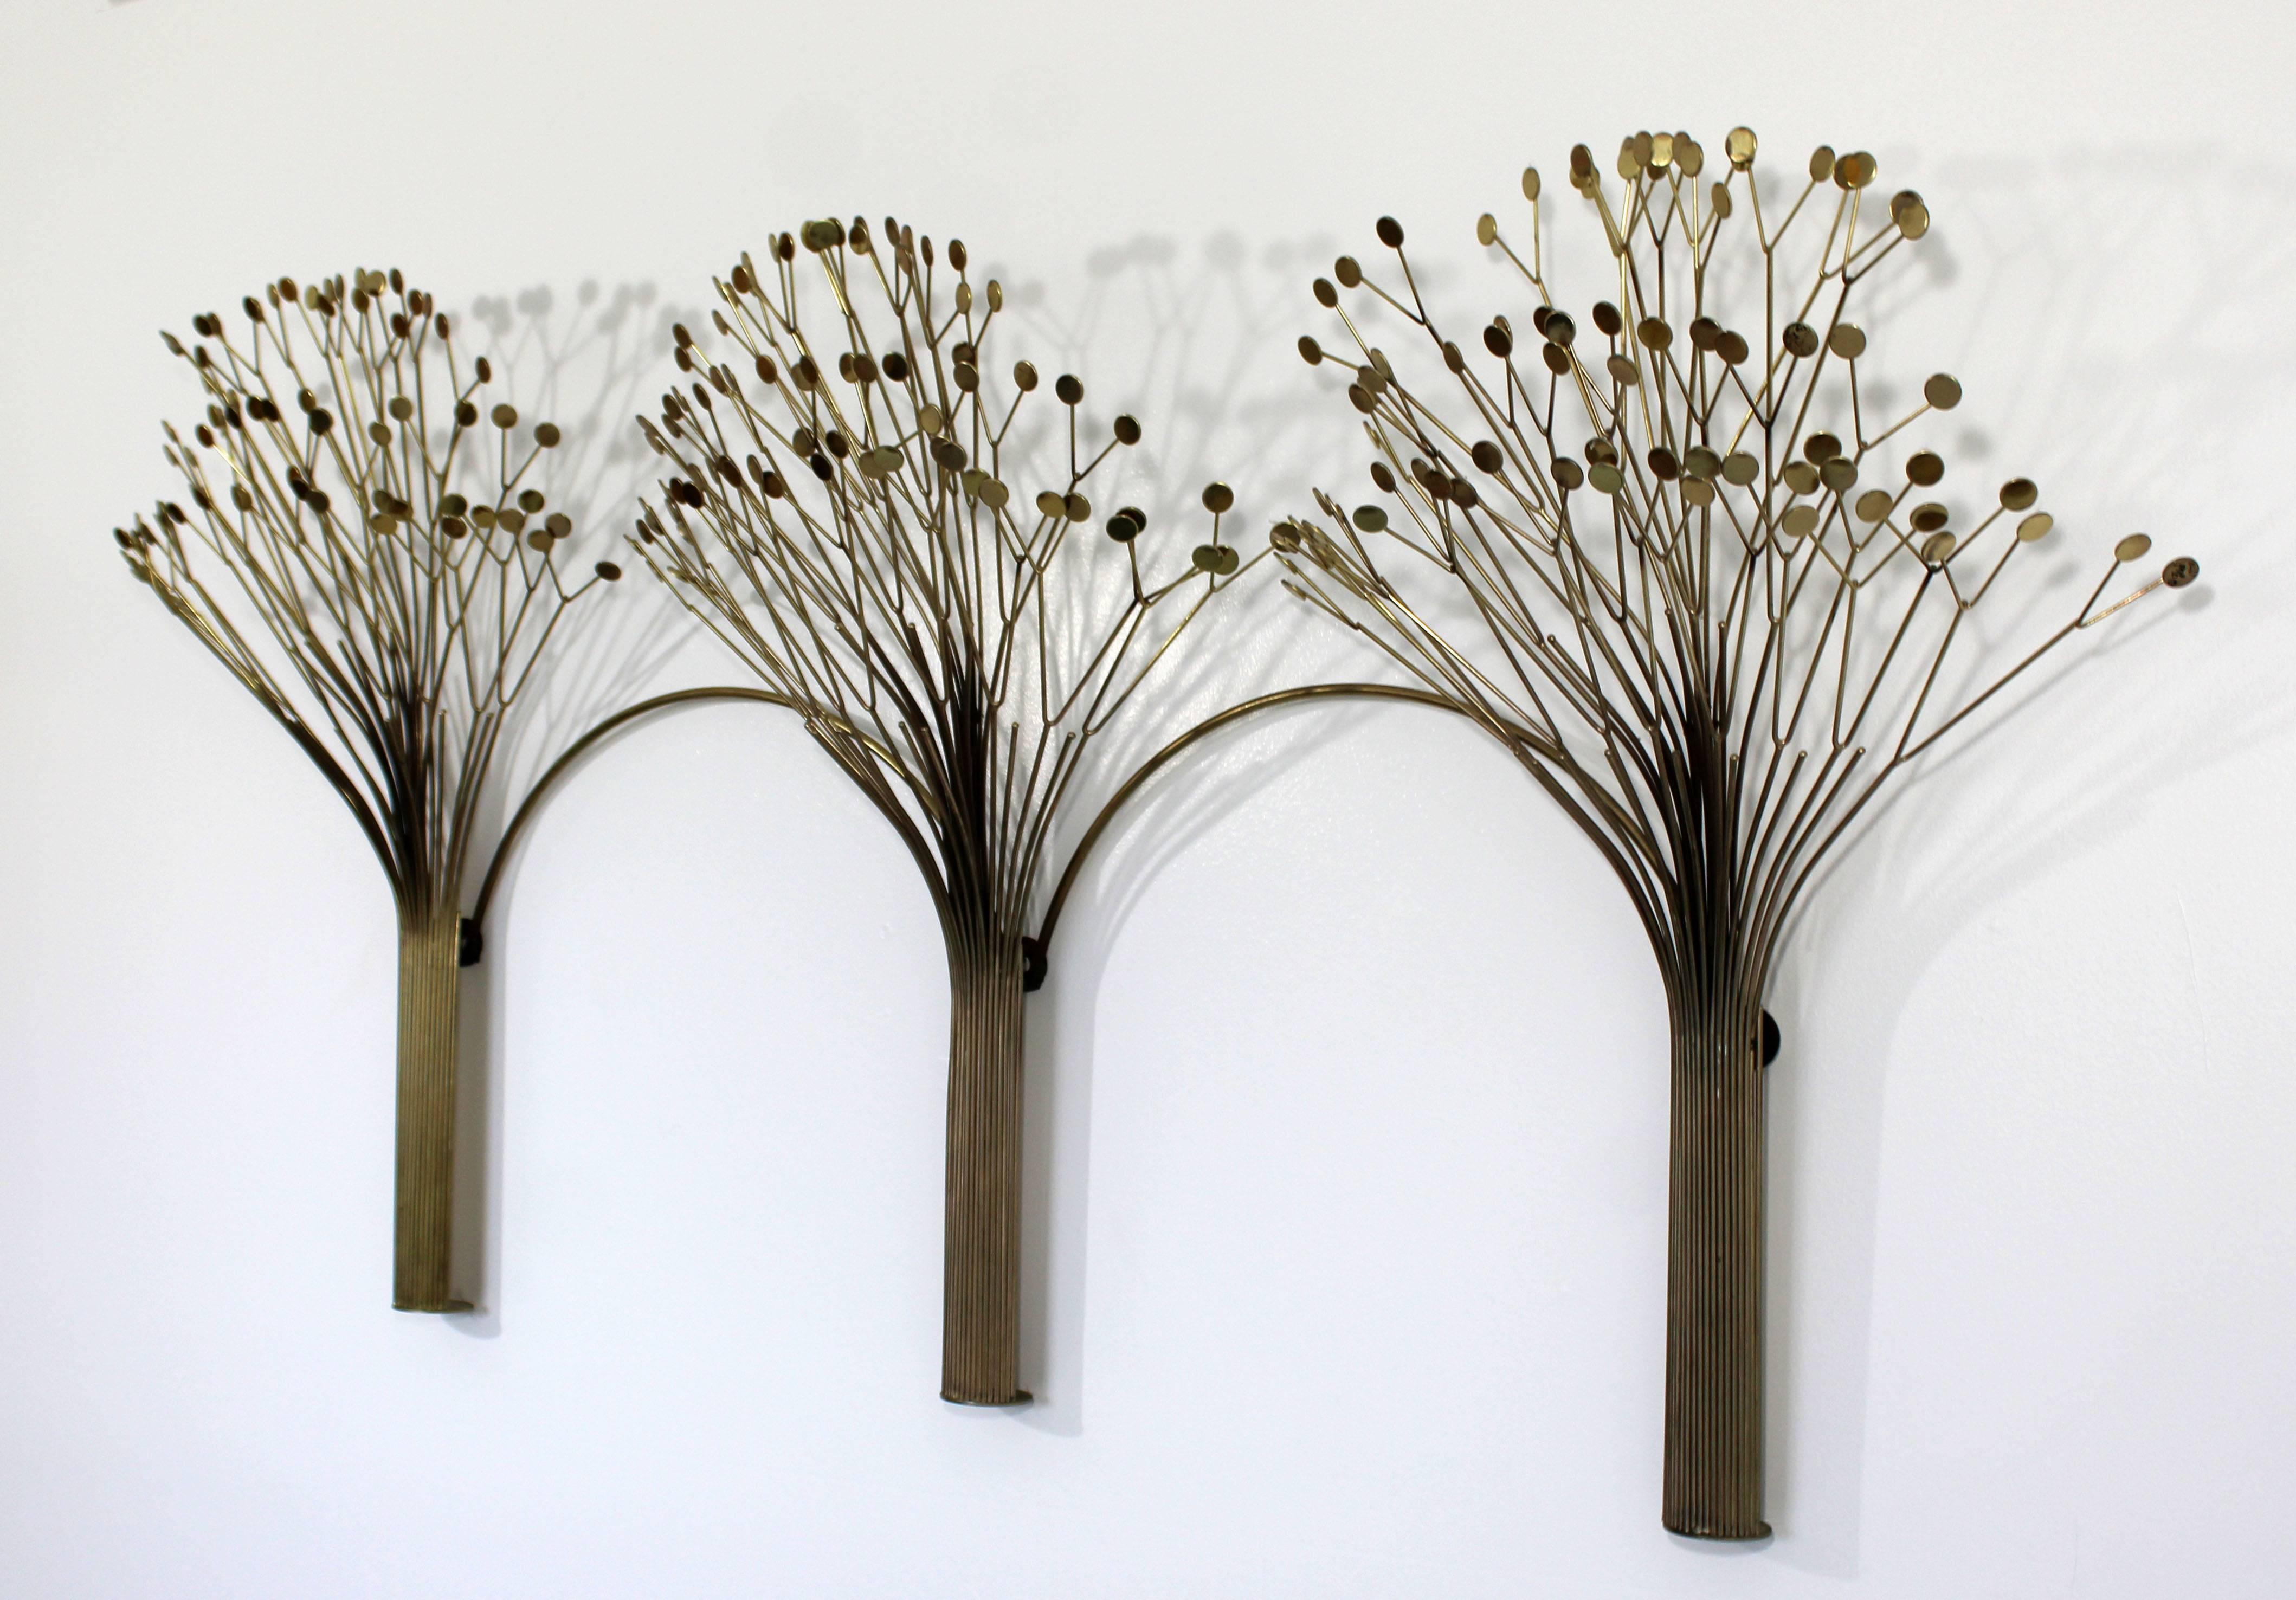 Late 20th Century Mid-Century Modern Rare Jere Brass Three Tree Wall Sculpture Signed Dated 1970s